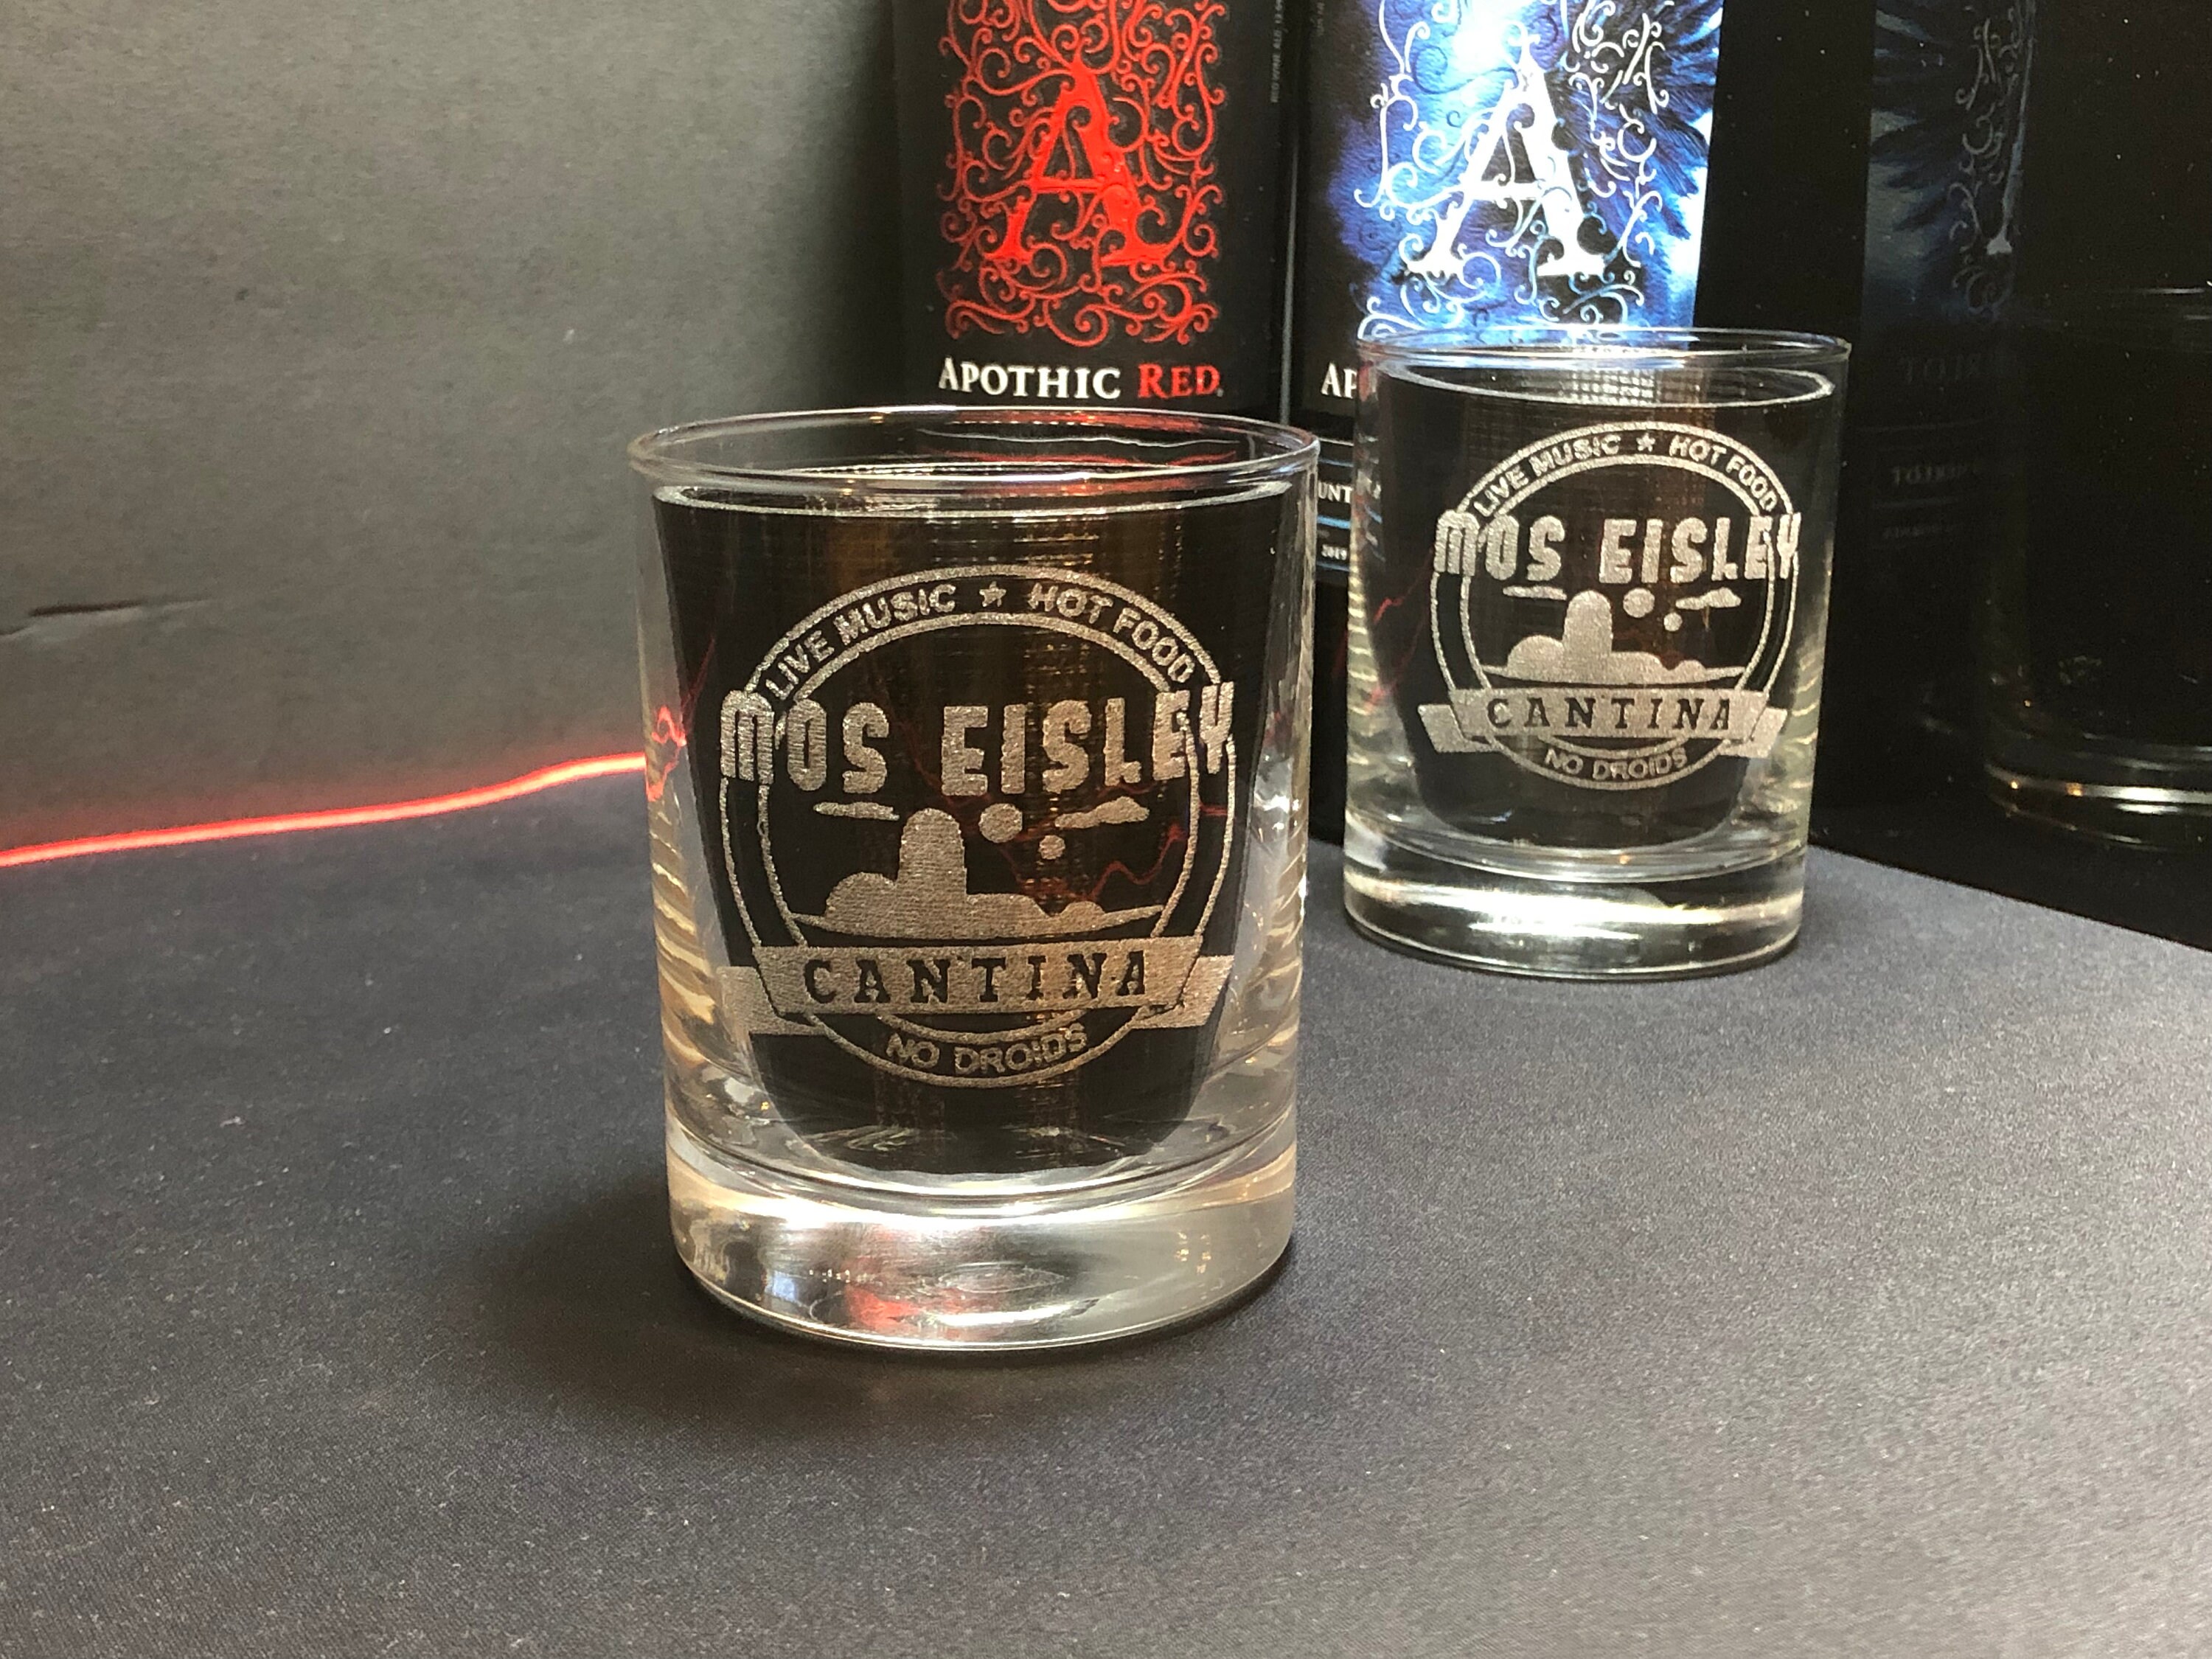 Star Wars Drinking Glass Set of 4 Etched Rocks Whiskey Glasses